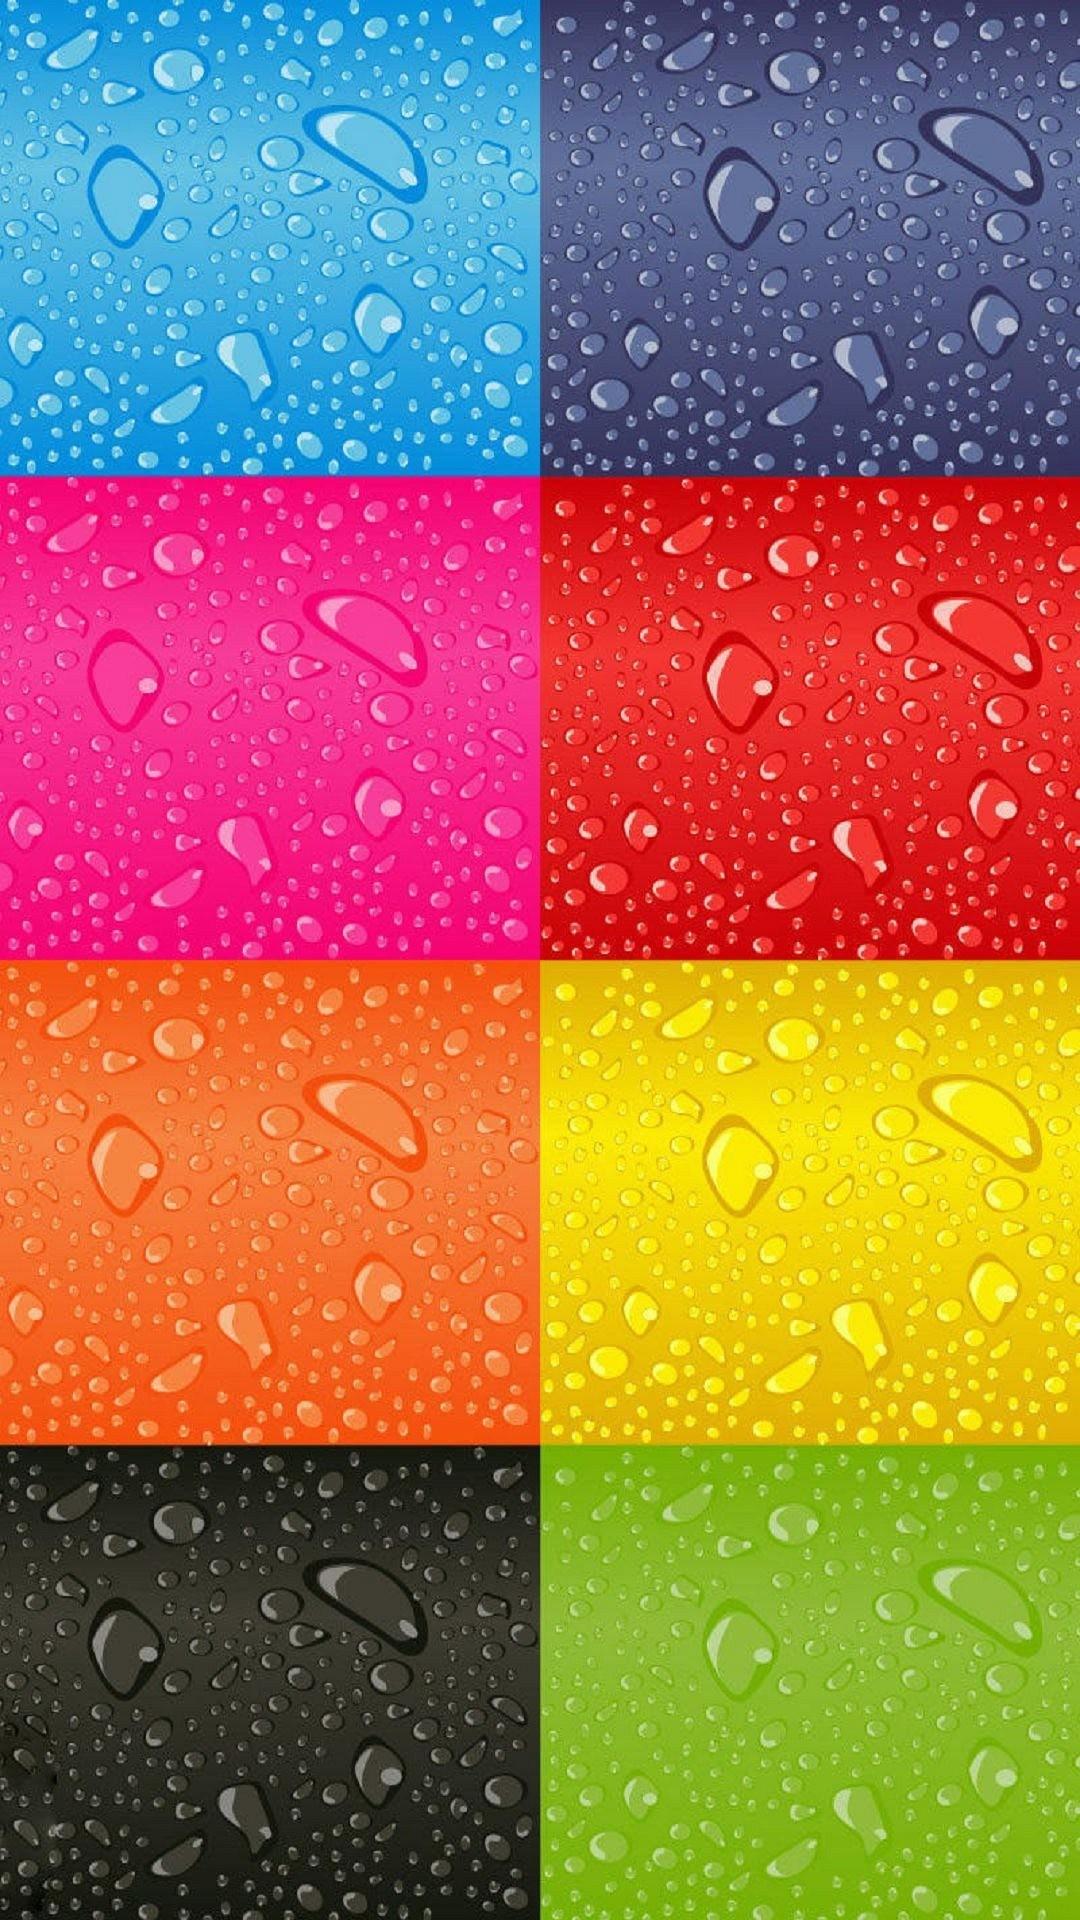 colorful Android HD wallpaper for home screen